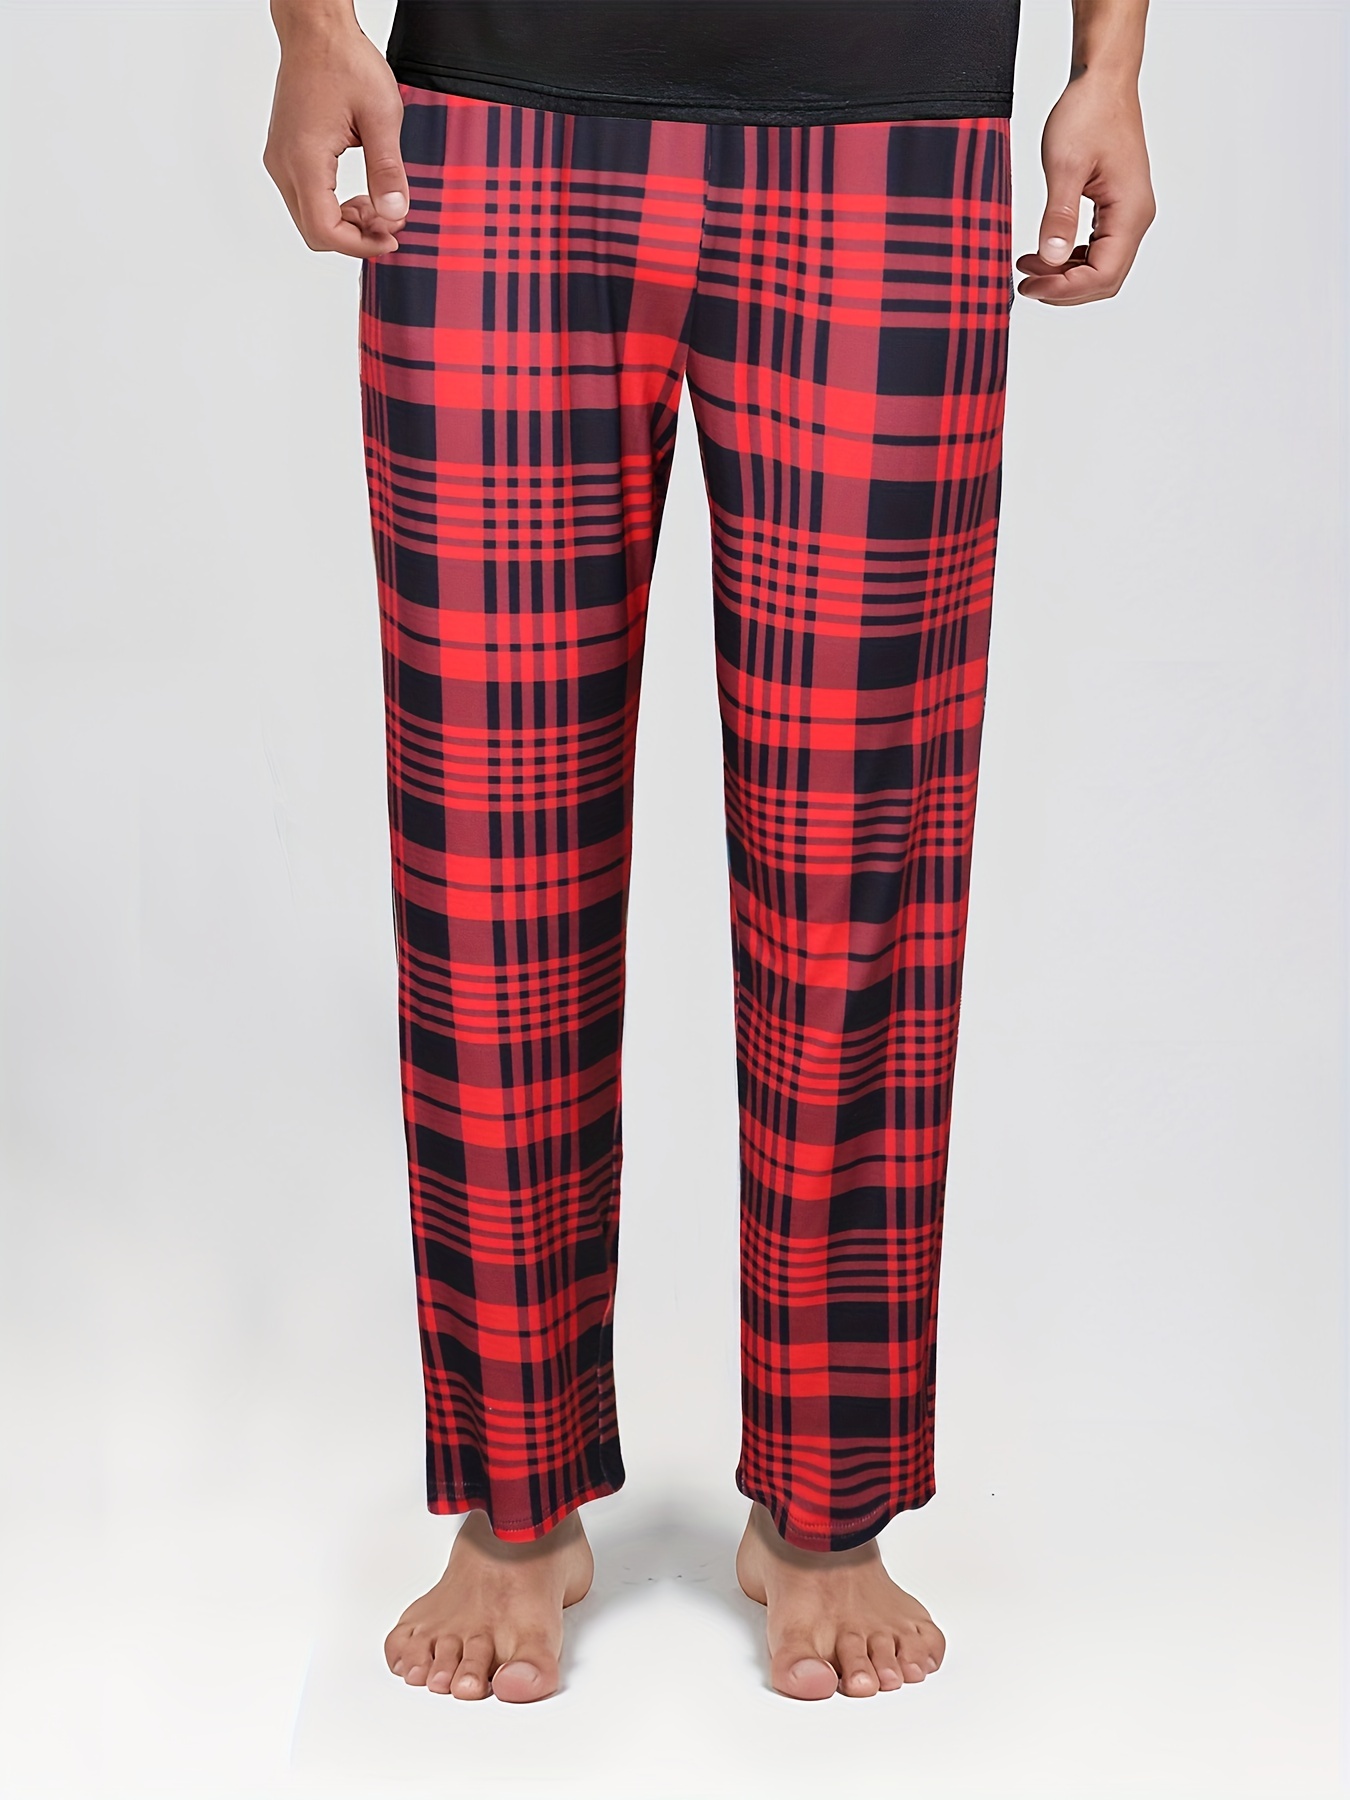 Womens Cotton Plaid Pajama Pants Comfy Lounge Trousers Sleepwear Bottoms  Drawstring Sleepwear with Pockets at  Women's Clothing store